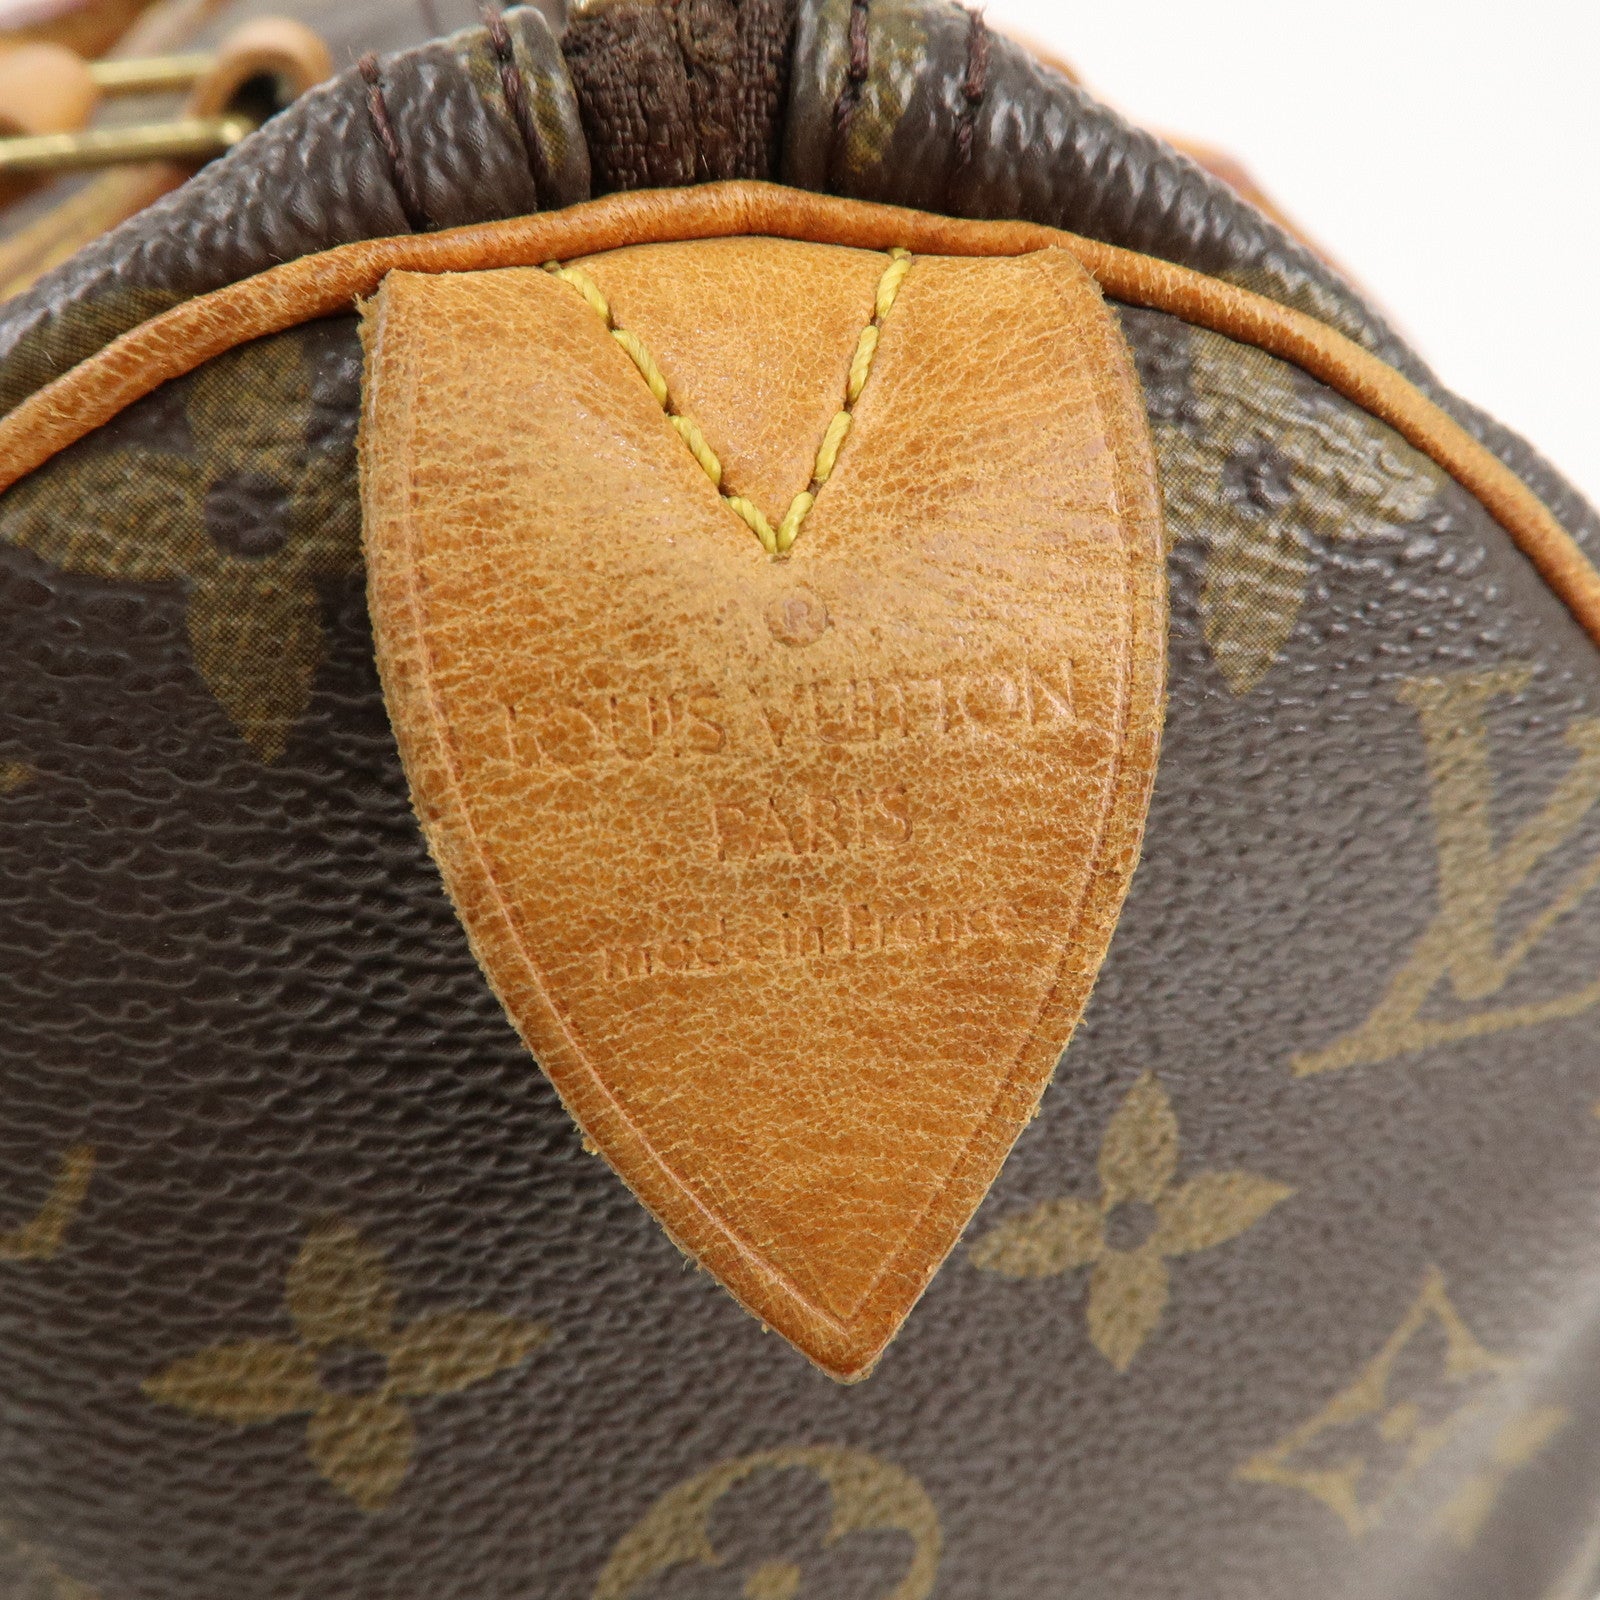 Buy Authentic Pre-owned Louis Vuitton Vintage Lv Monogram Speedy 30 Hand Bag  Duffle M41526 M41108 210077 from Japan - Buy authentic Plus exclusive items  from Japan